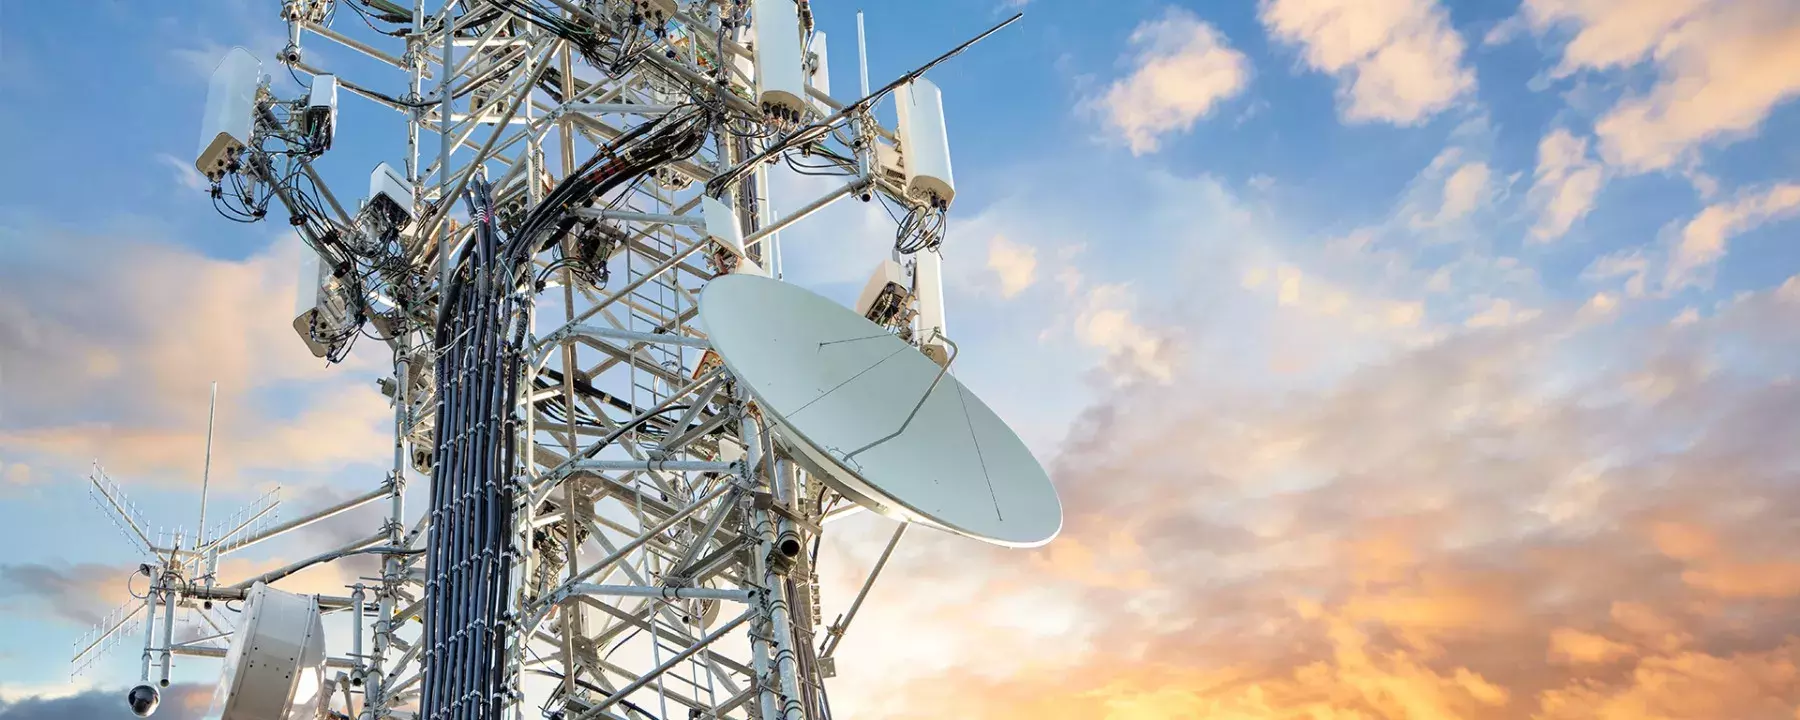 Can telcos deliver the ecosystem to monetise 5G and IoT? 